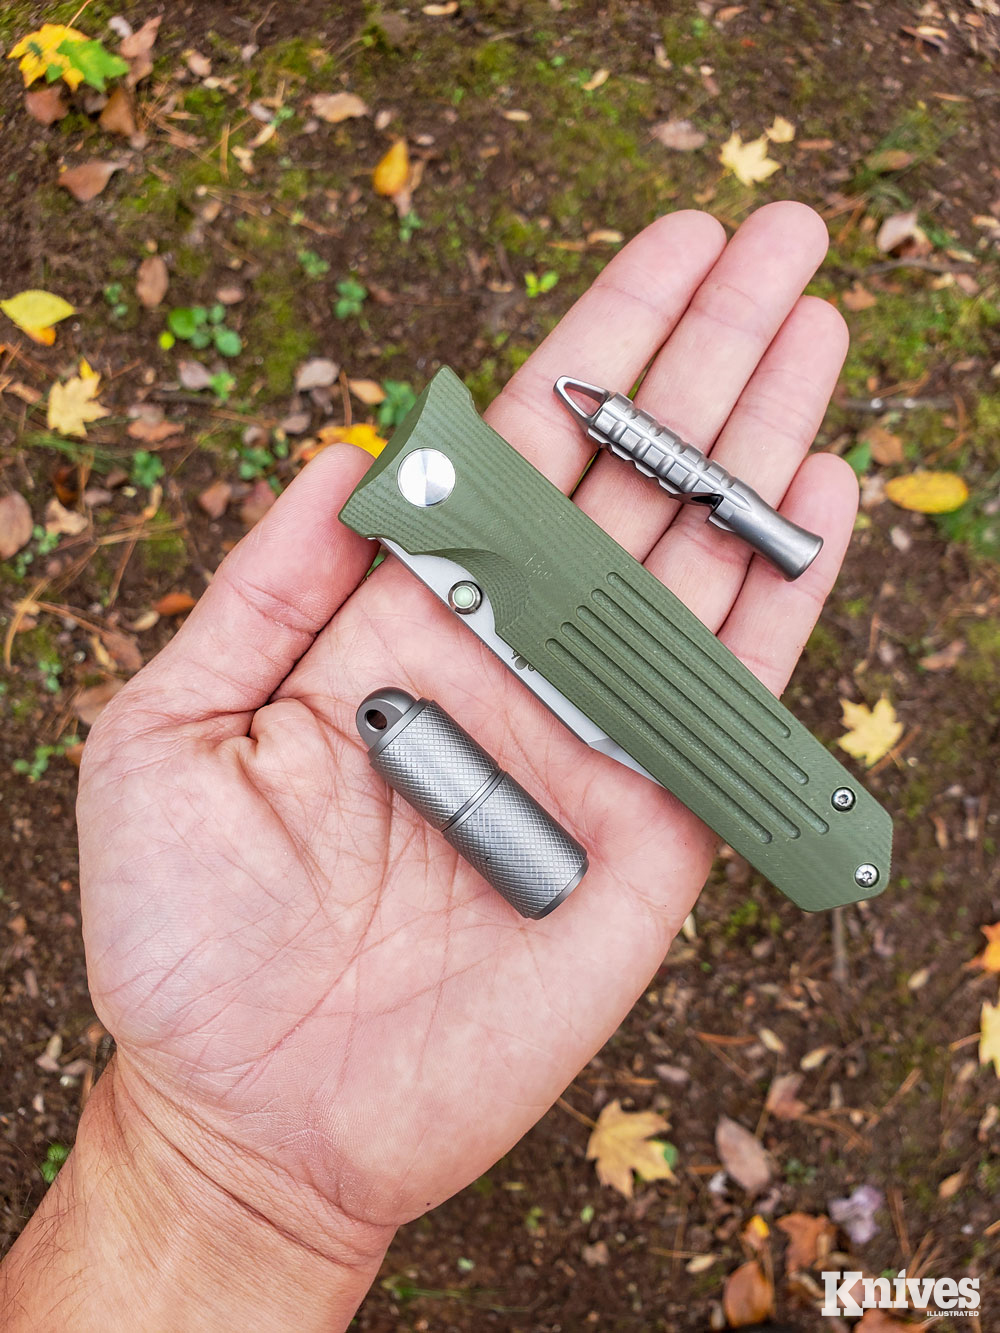 The STS-AT pairs perfectly with Prometheus Design Werx EDC items.